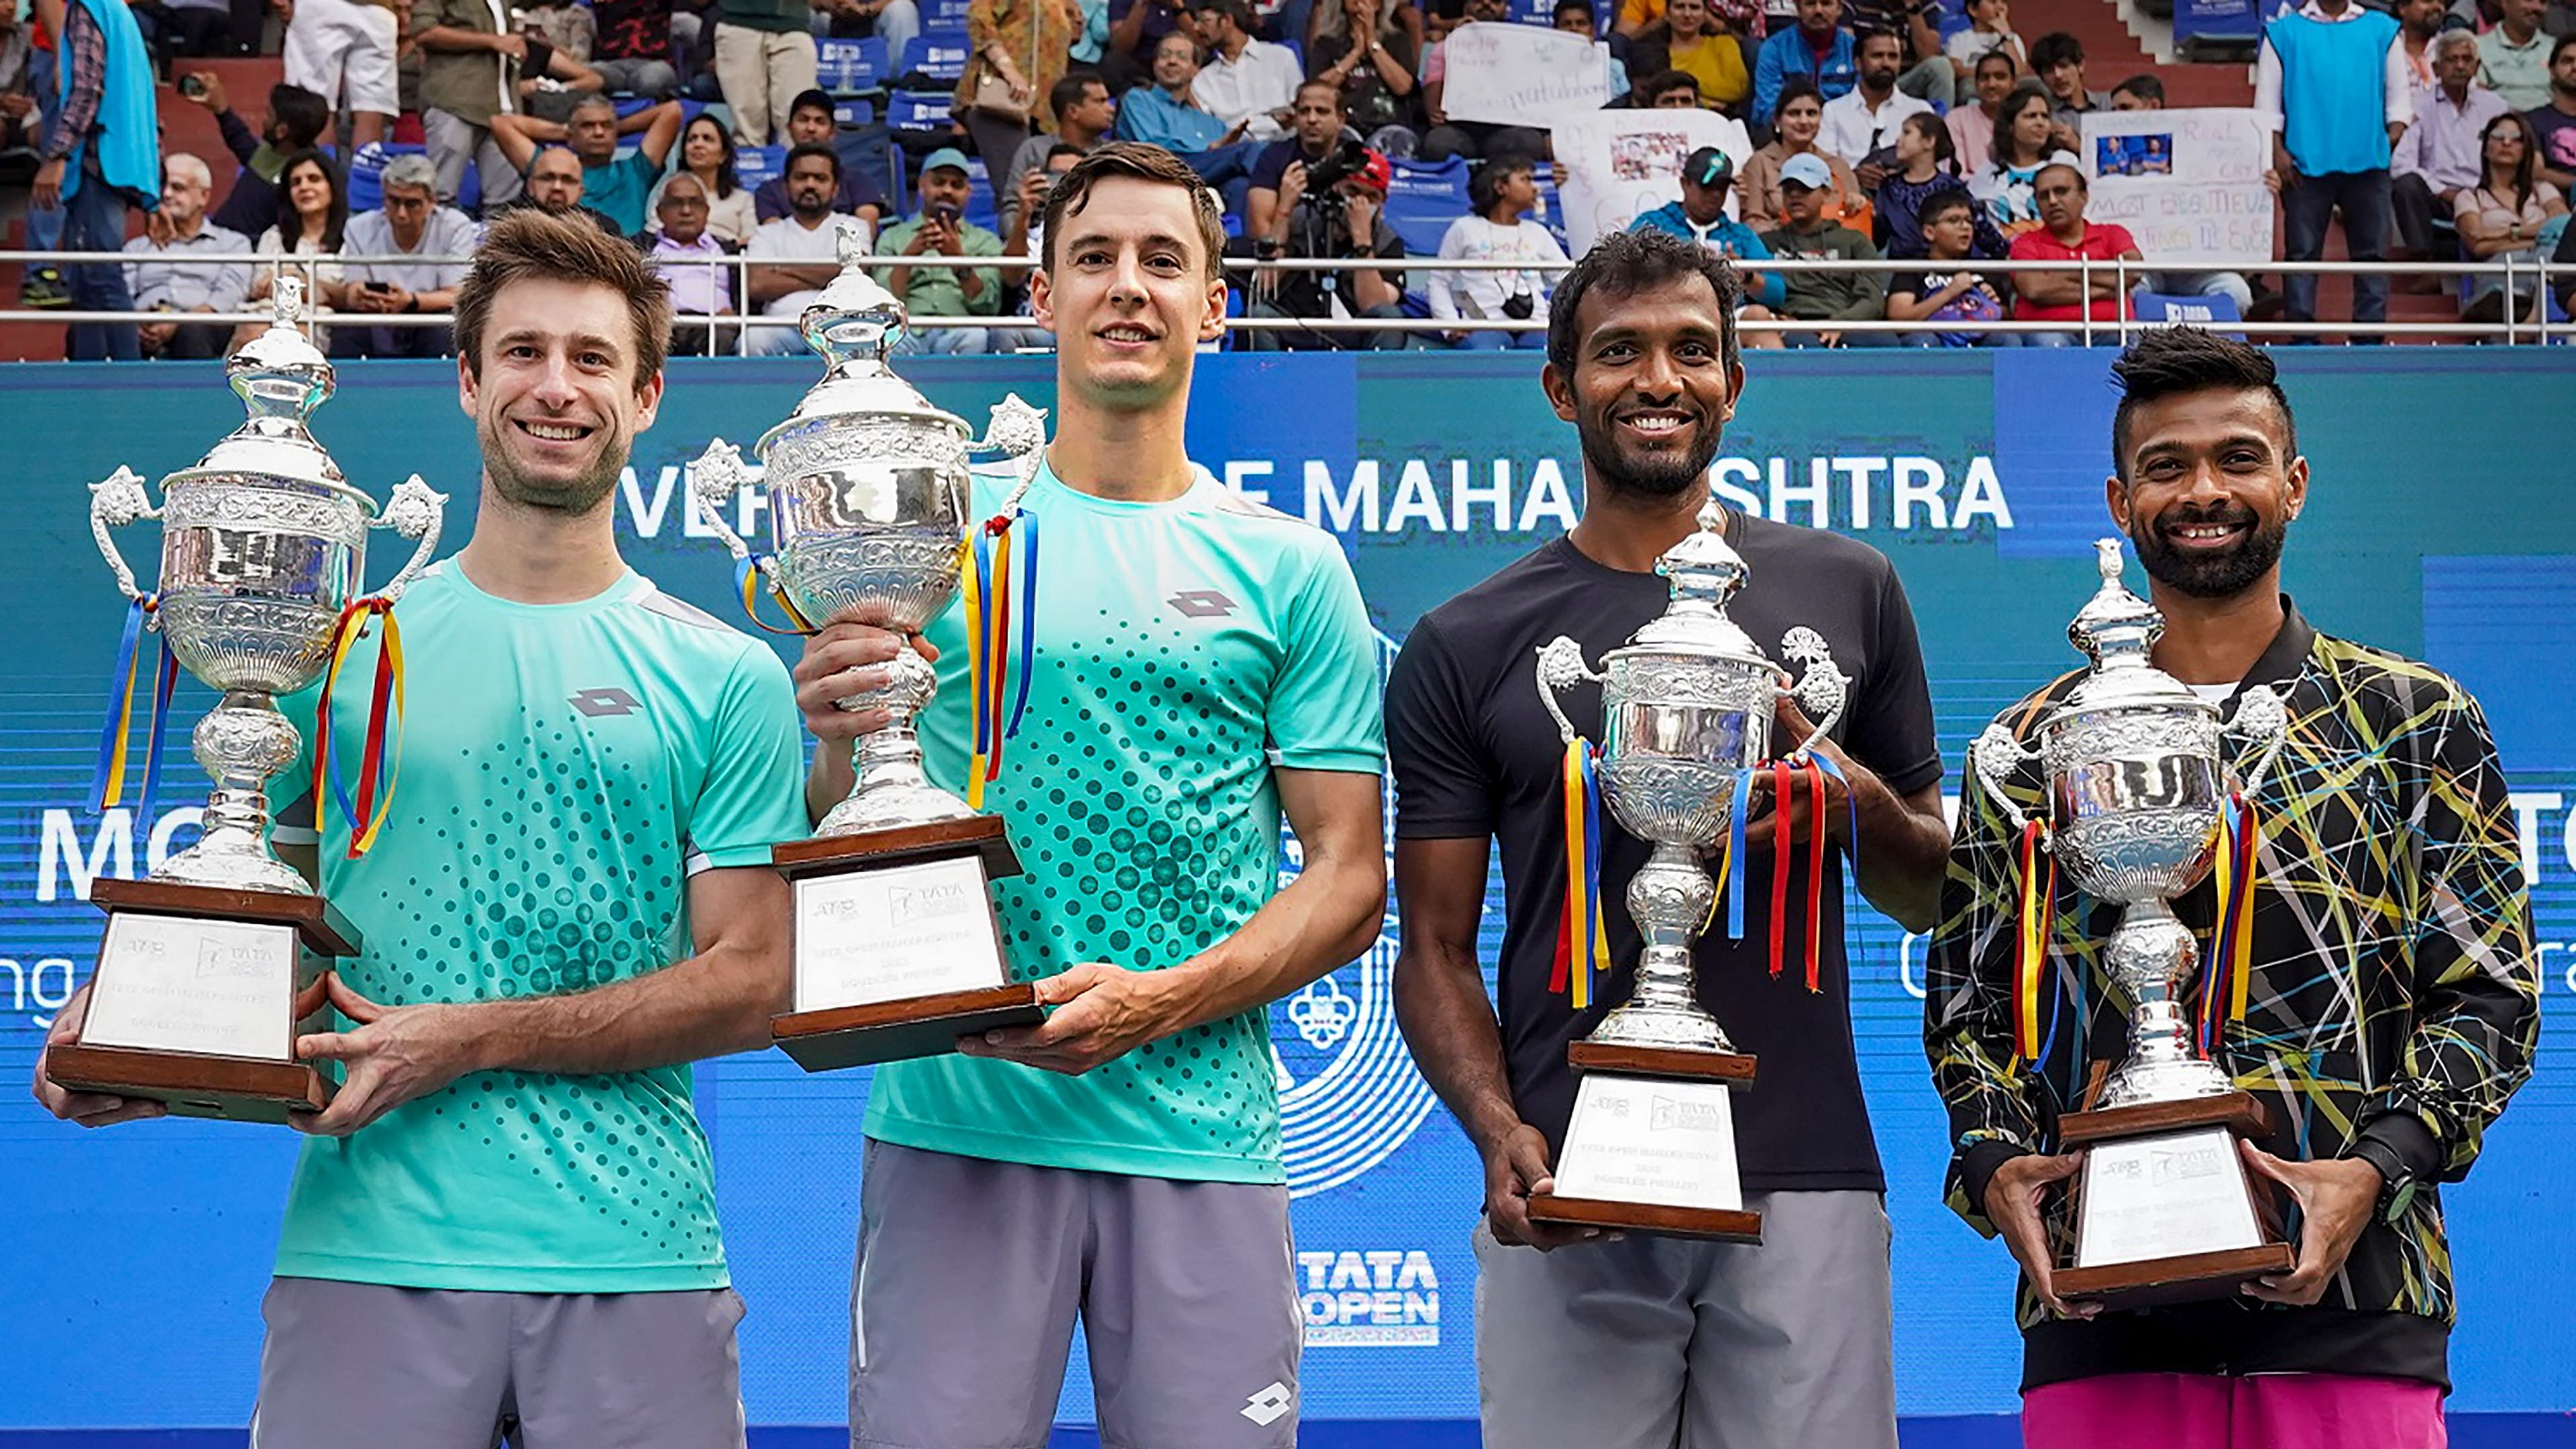 Despite having less number of aces and winners, Balaji and Nedunchezhiyan had more service points, and delivered when it mattered the most, converting both their break points. Credit: PTI File Photo